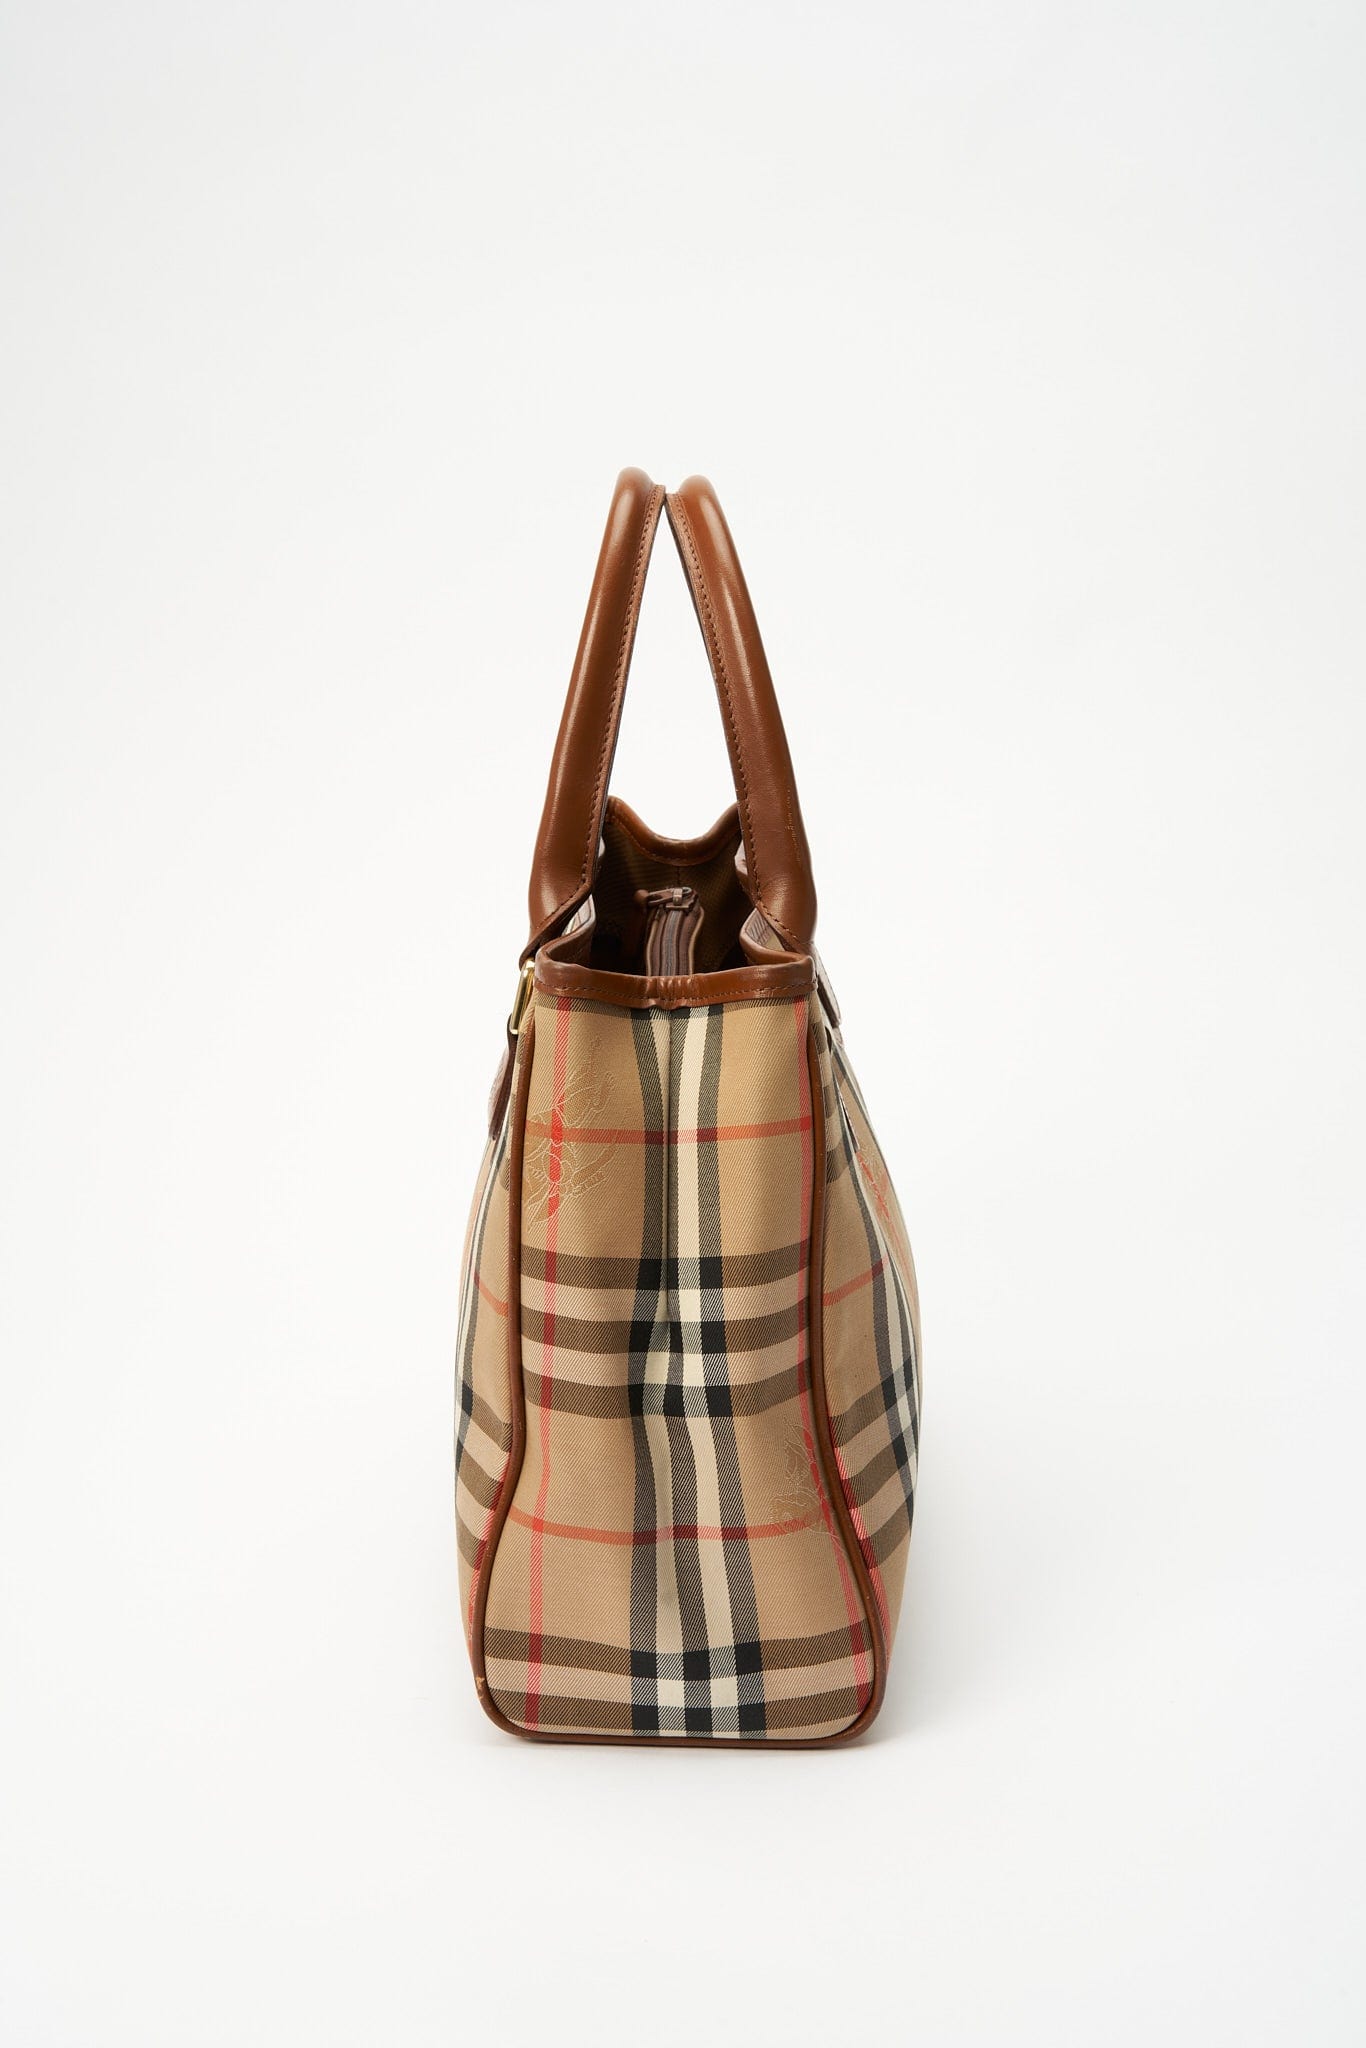 Vintage Burberry Tote Bag With Tan Leather Trim – The Hosta